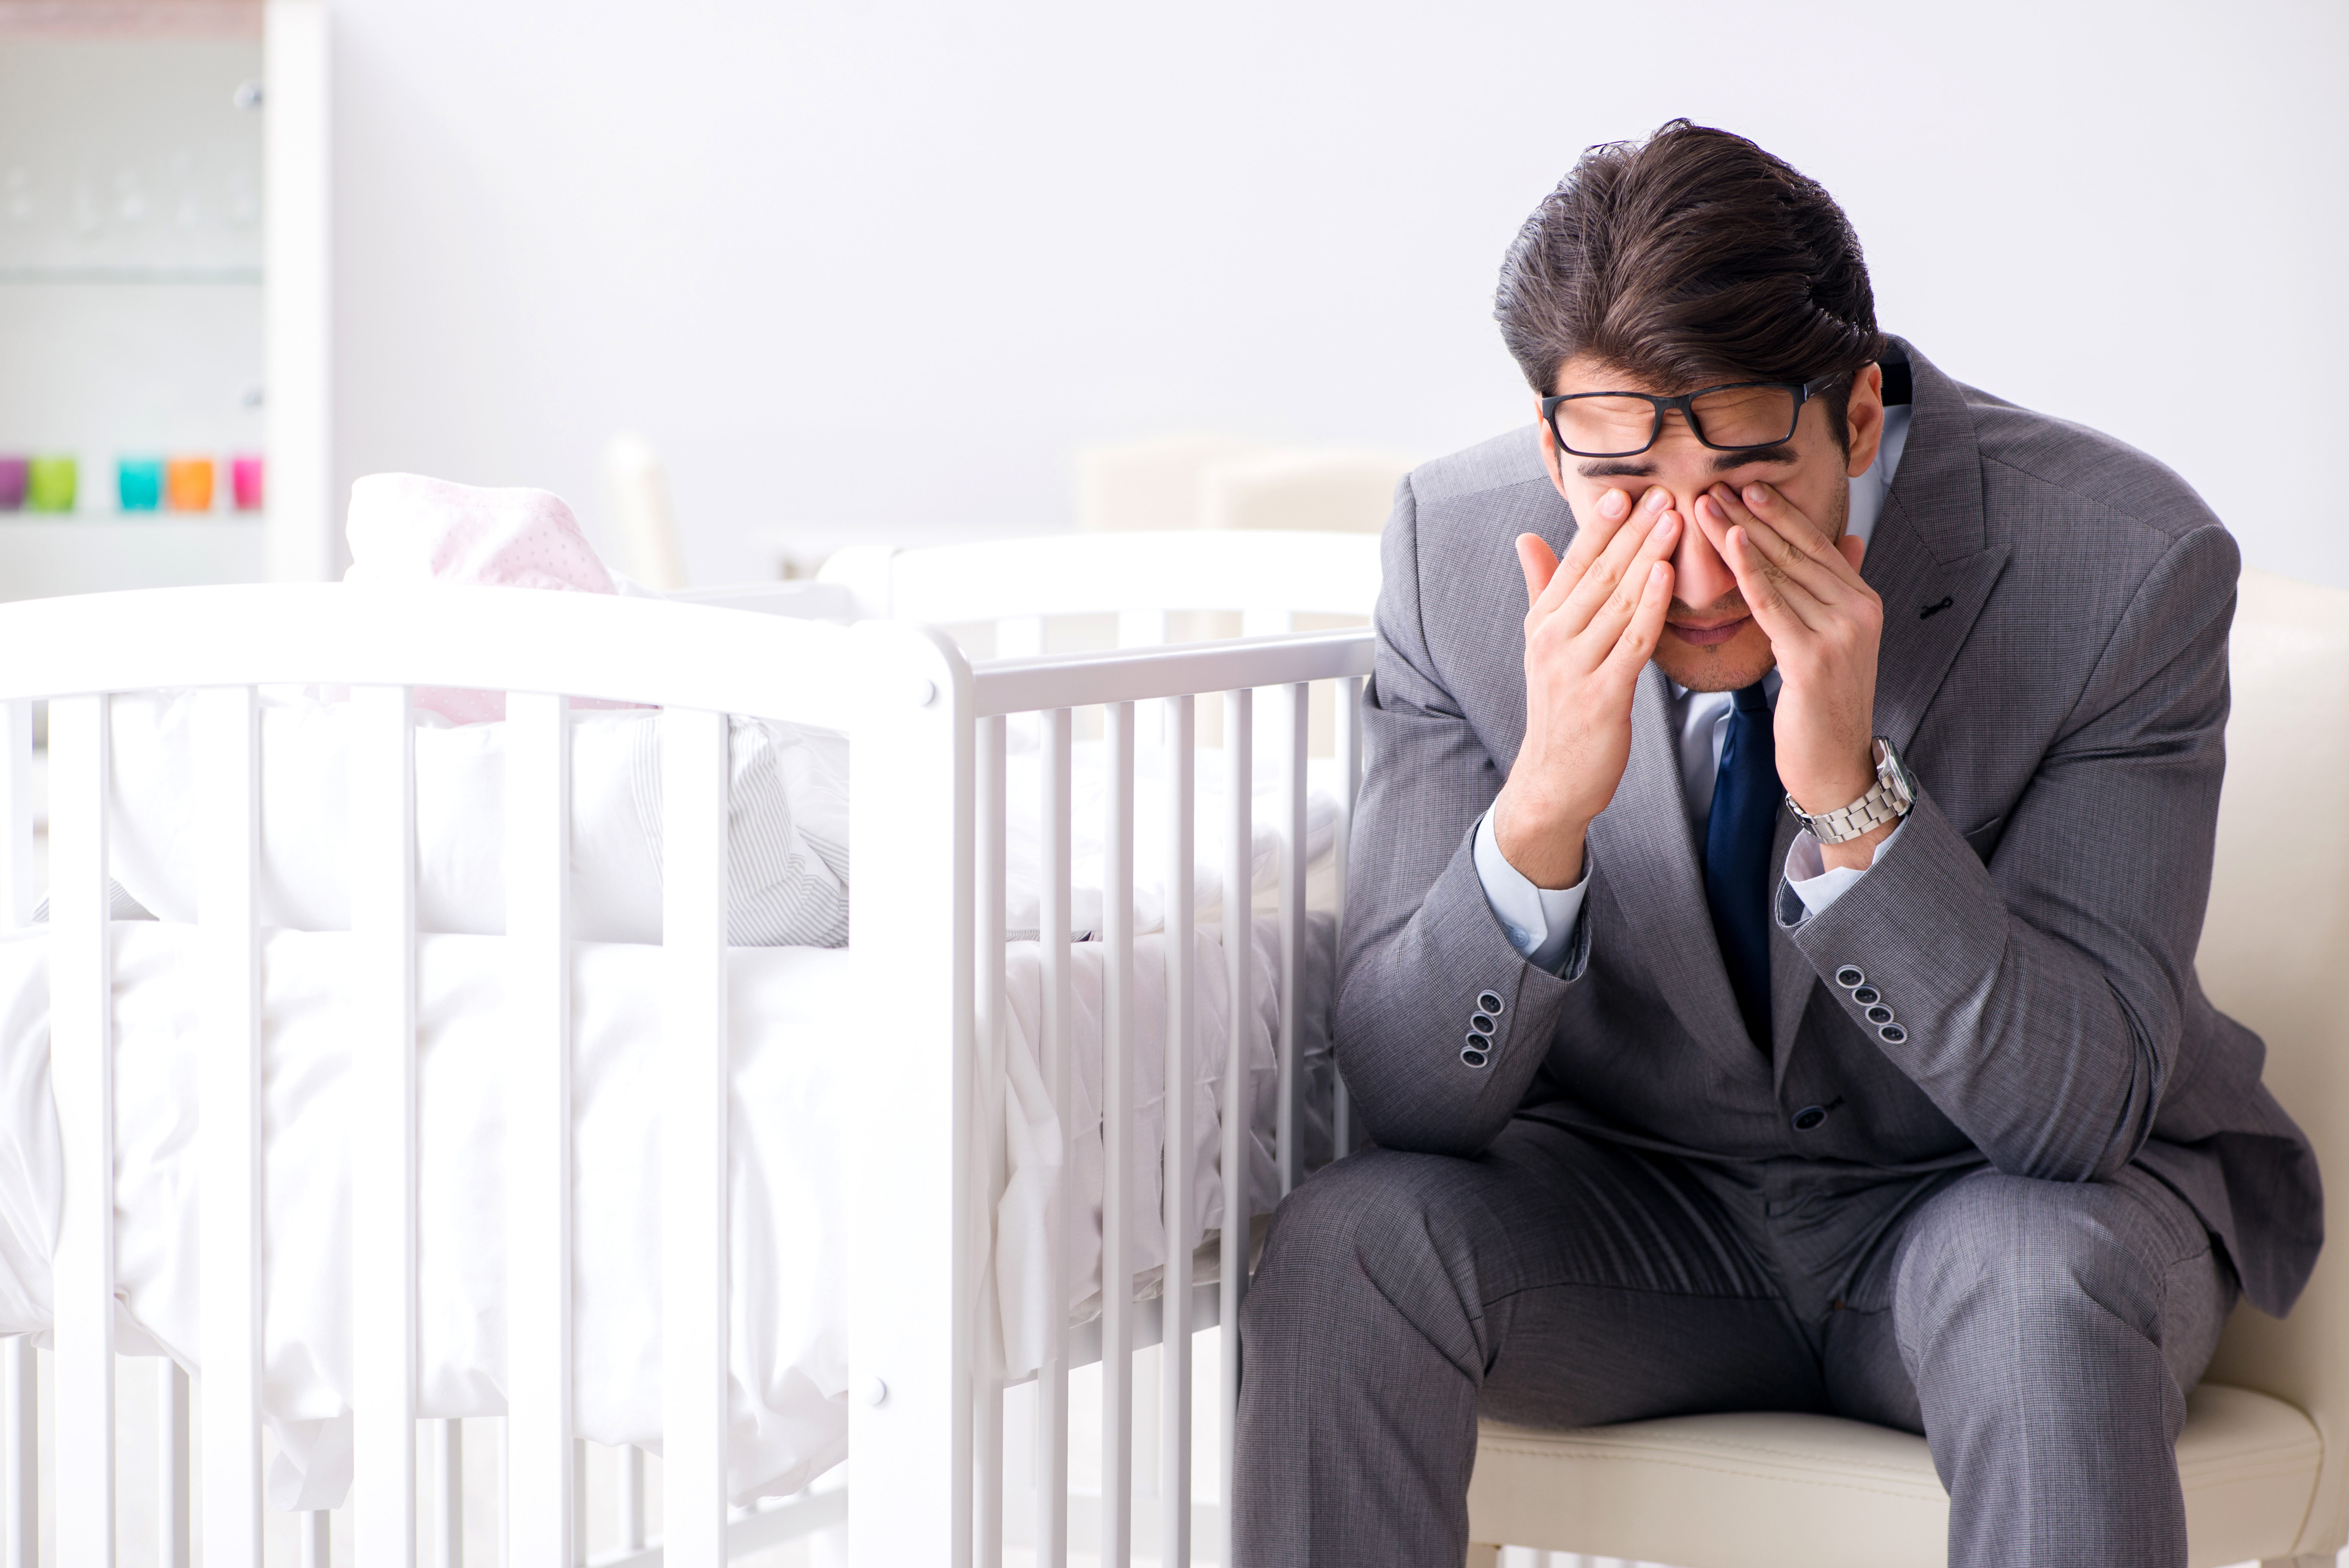 A man sitting next to a crib looking stressed | Source: Shutterstock